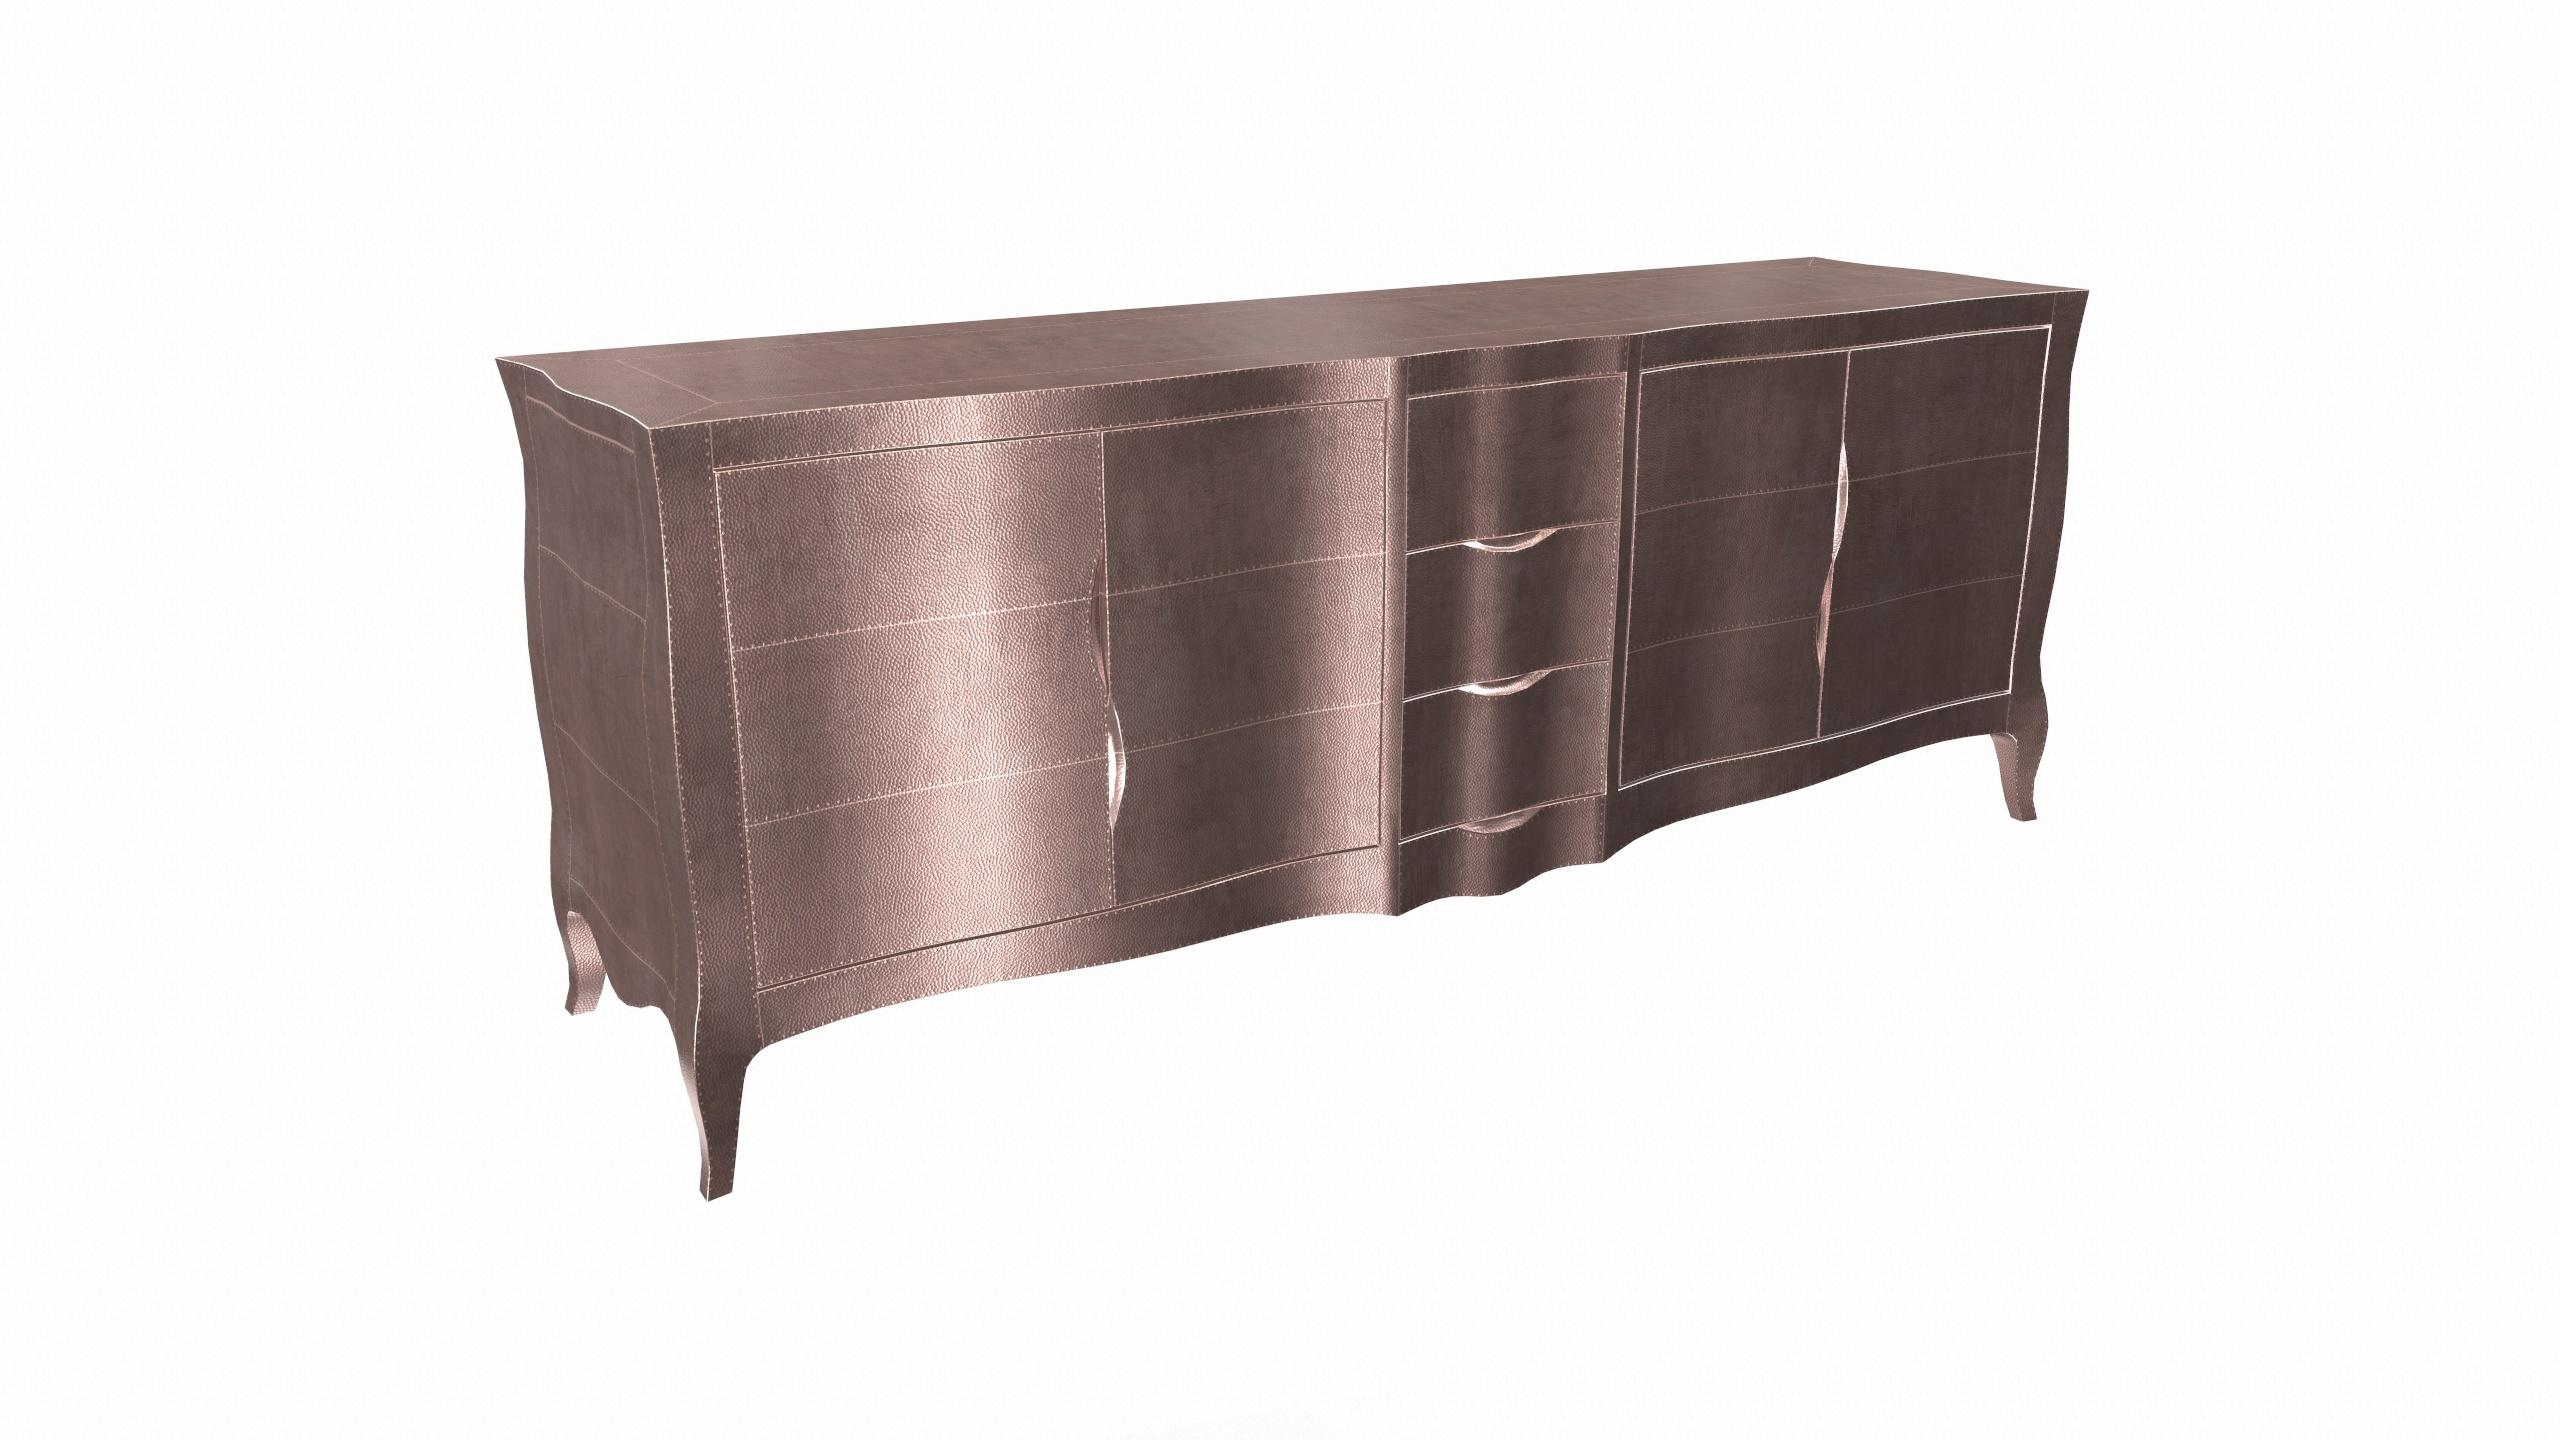 Contemporary Louise Credenza Art Deco Dressers in Mid. Hammered Copper by Paul Mathieu For Sale